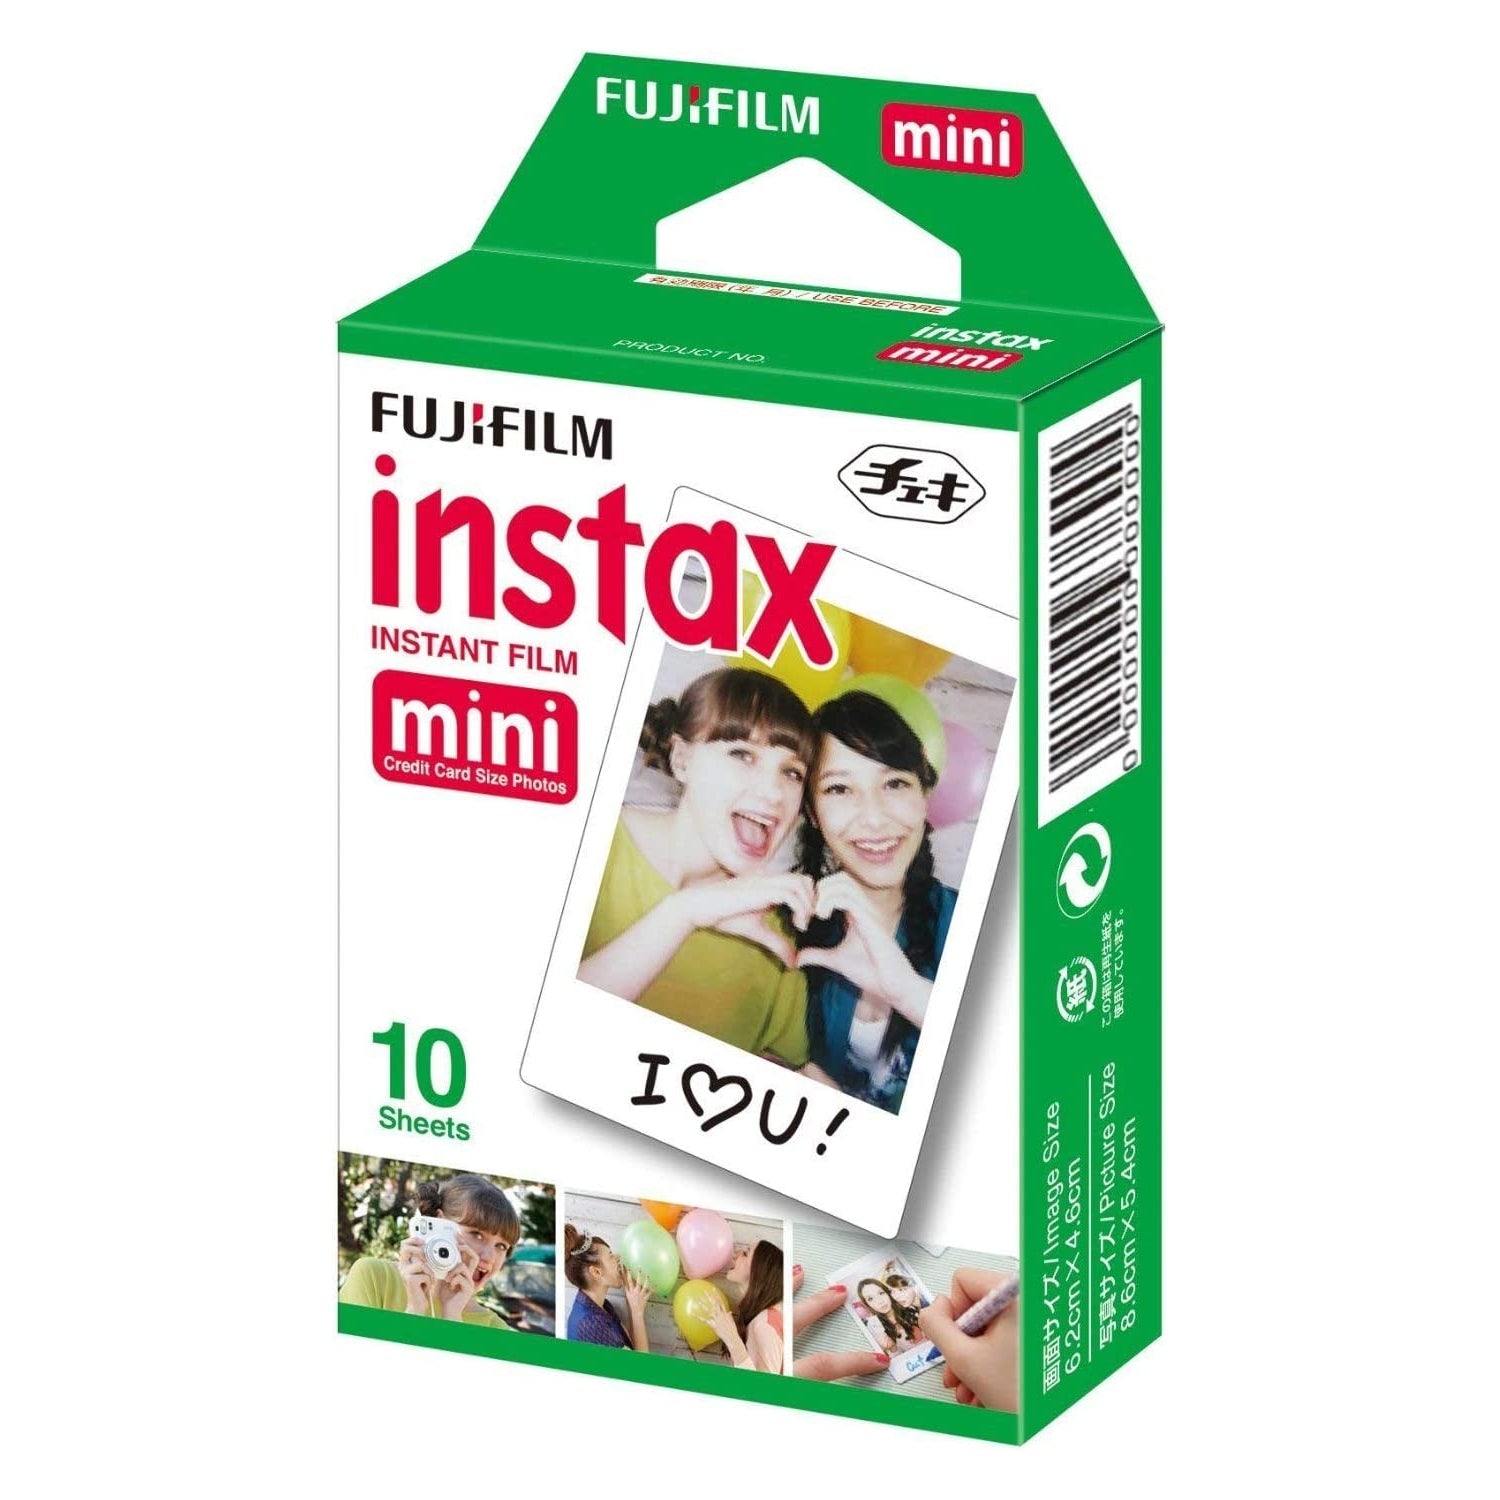 Fujifilm Instax Mini 11 Camera with Clear Case, Films and Stickers Bundle (Charcoal Grey)